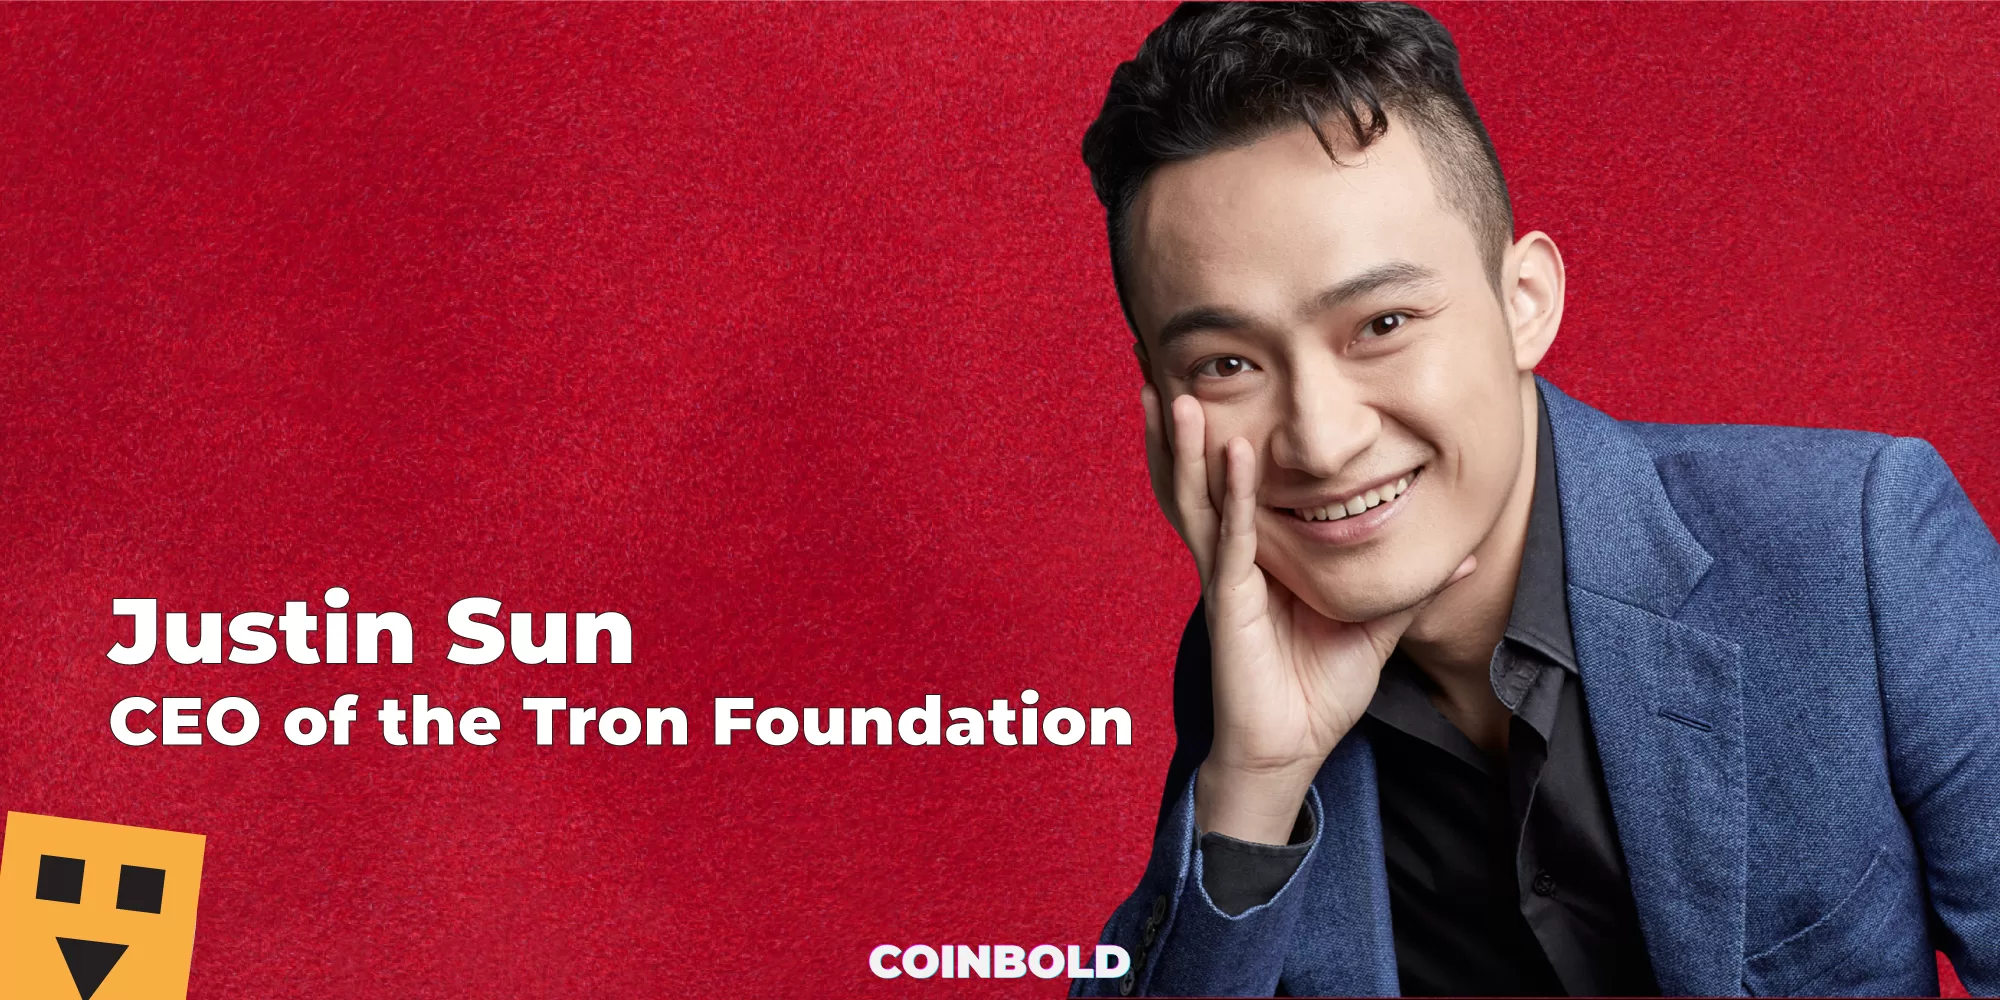 Justin Sun, CEO of the Tron Foundation